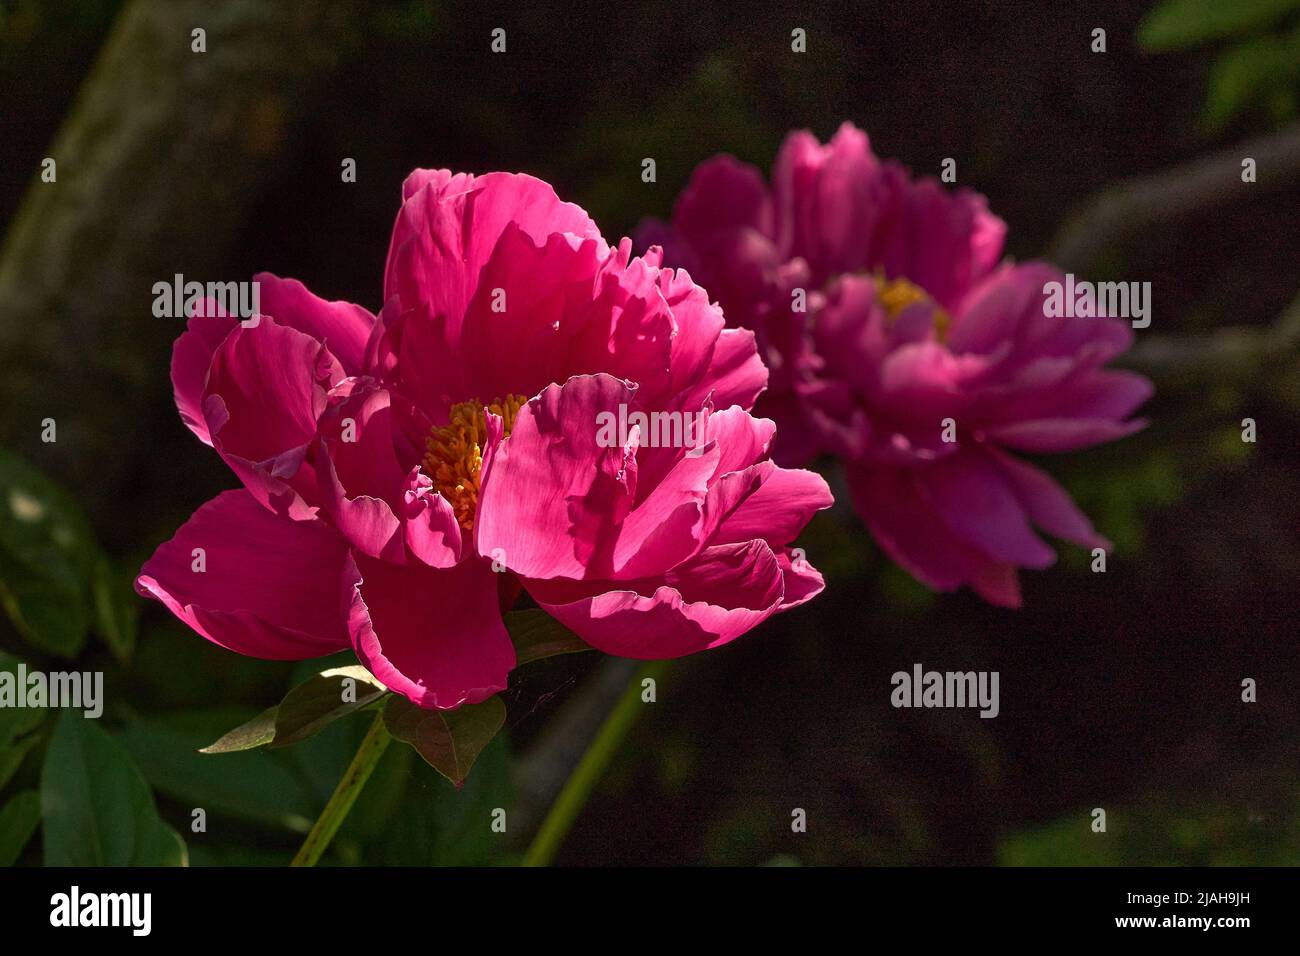 sunlight on two pink peony blossoms with soft focus foliage in background Stock Photo